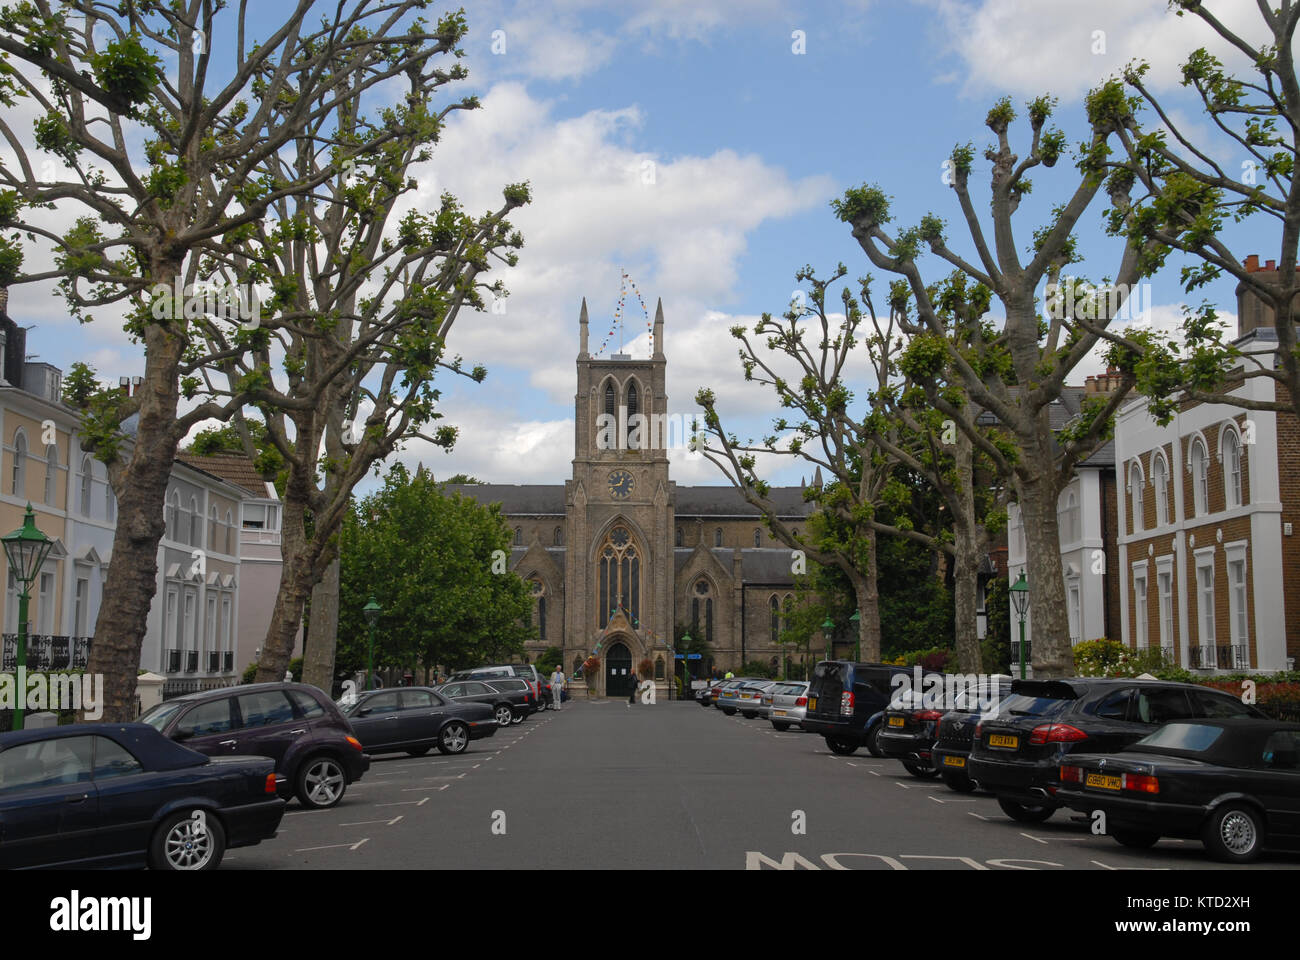 London, United Kingdom - June 6, 2015: St James´s Church in Notting Hill Stock Photo